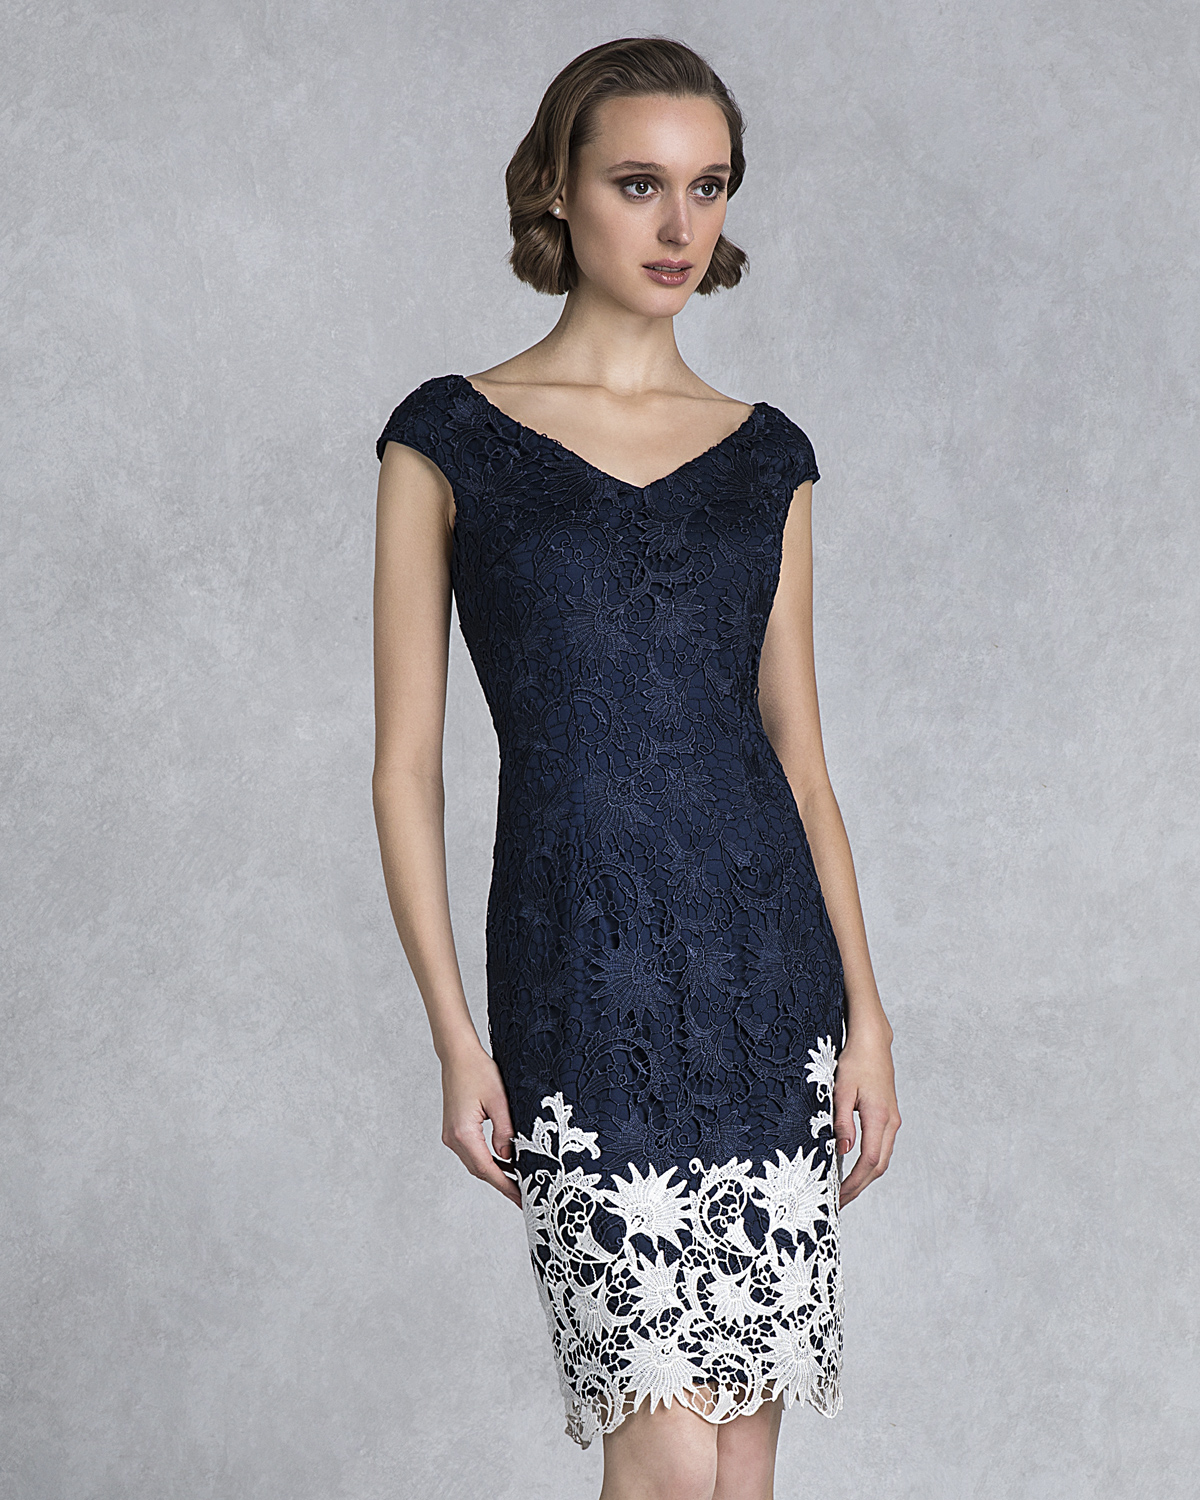 Classic Dresses / Mother of the bride short lace dress